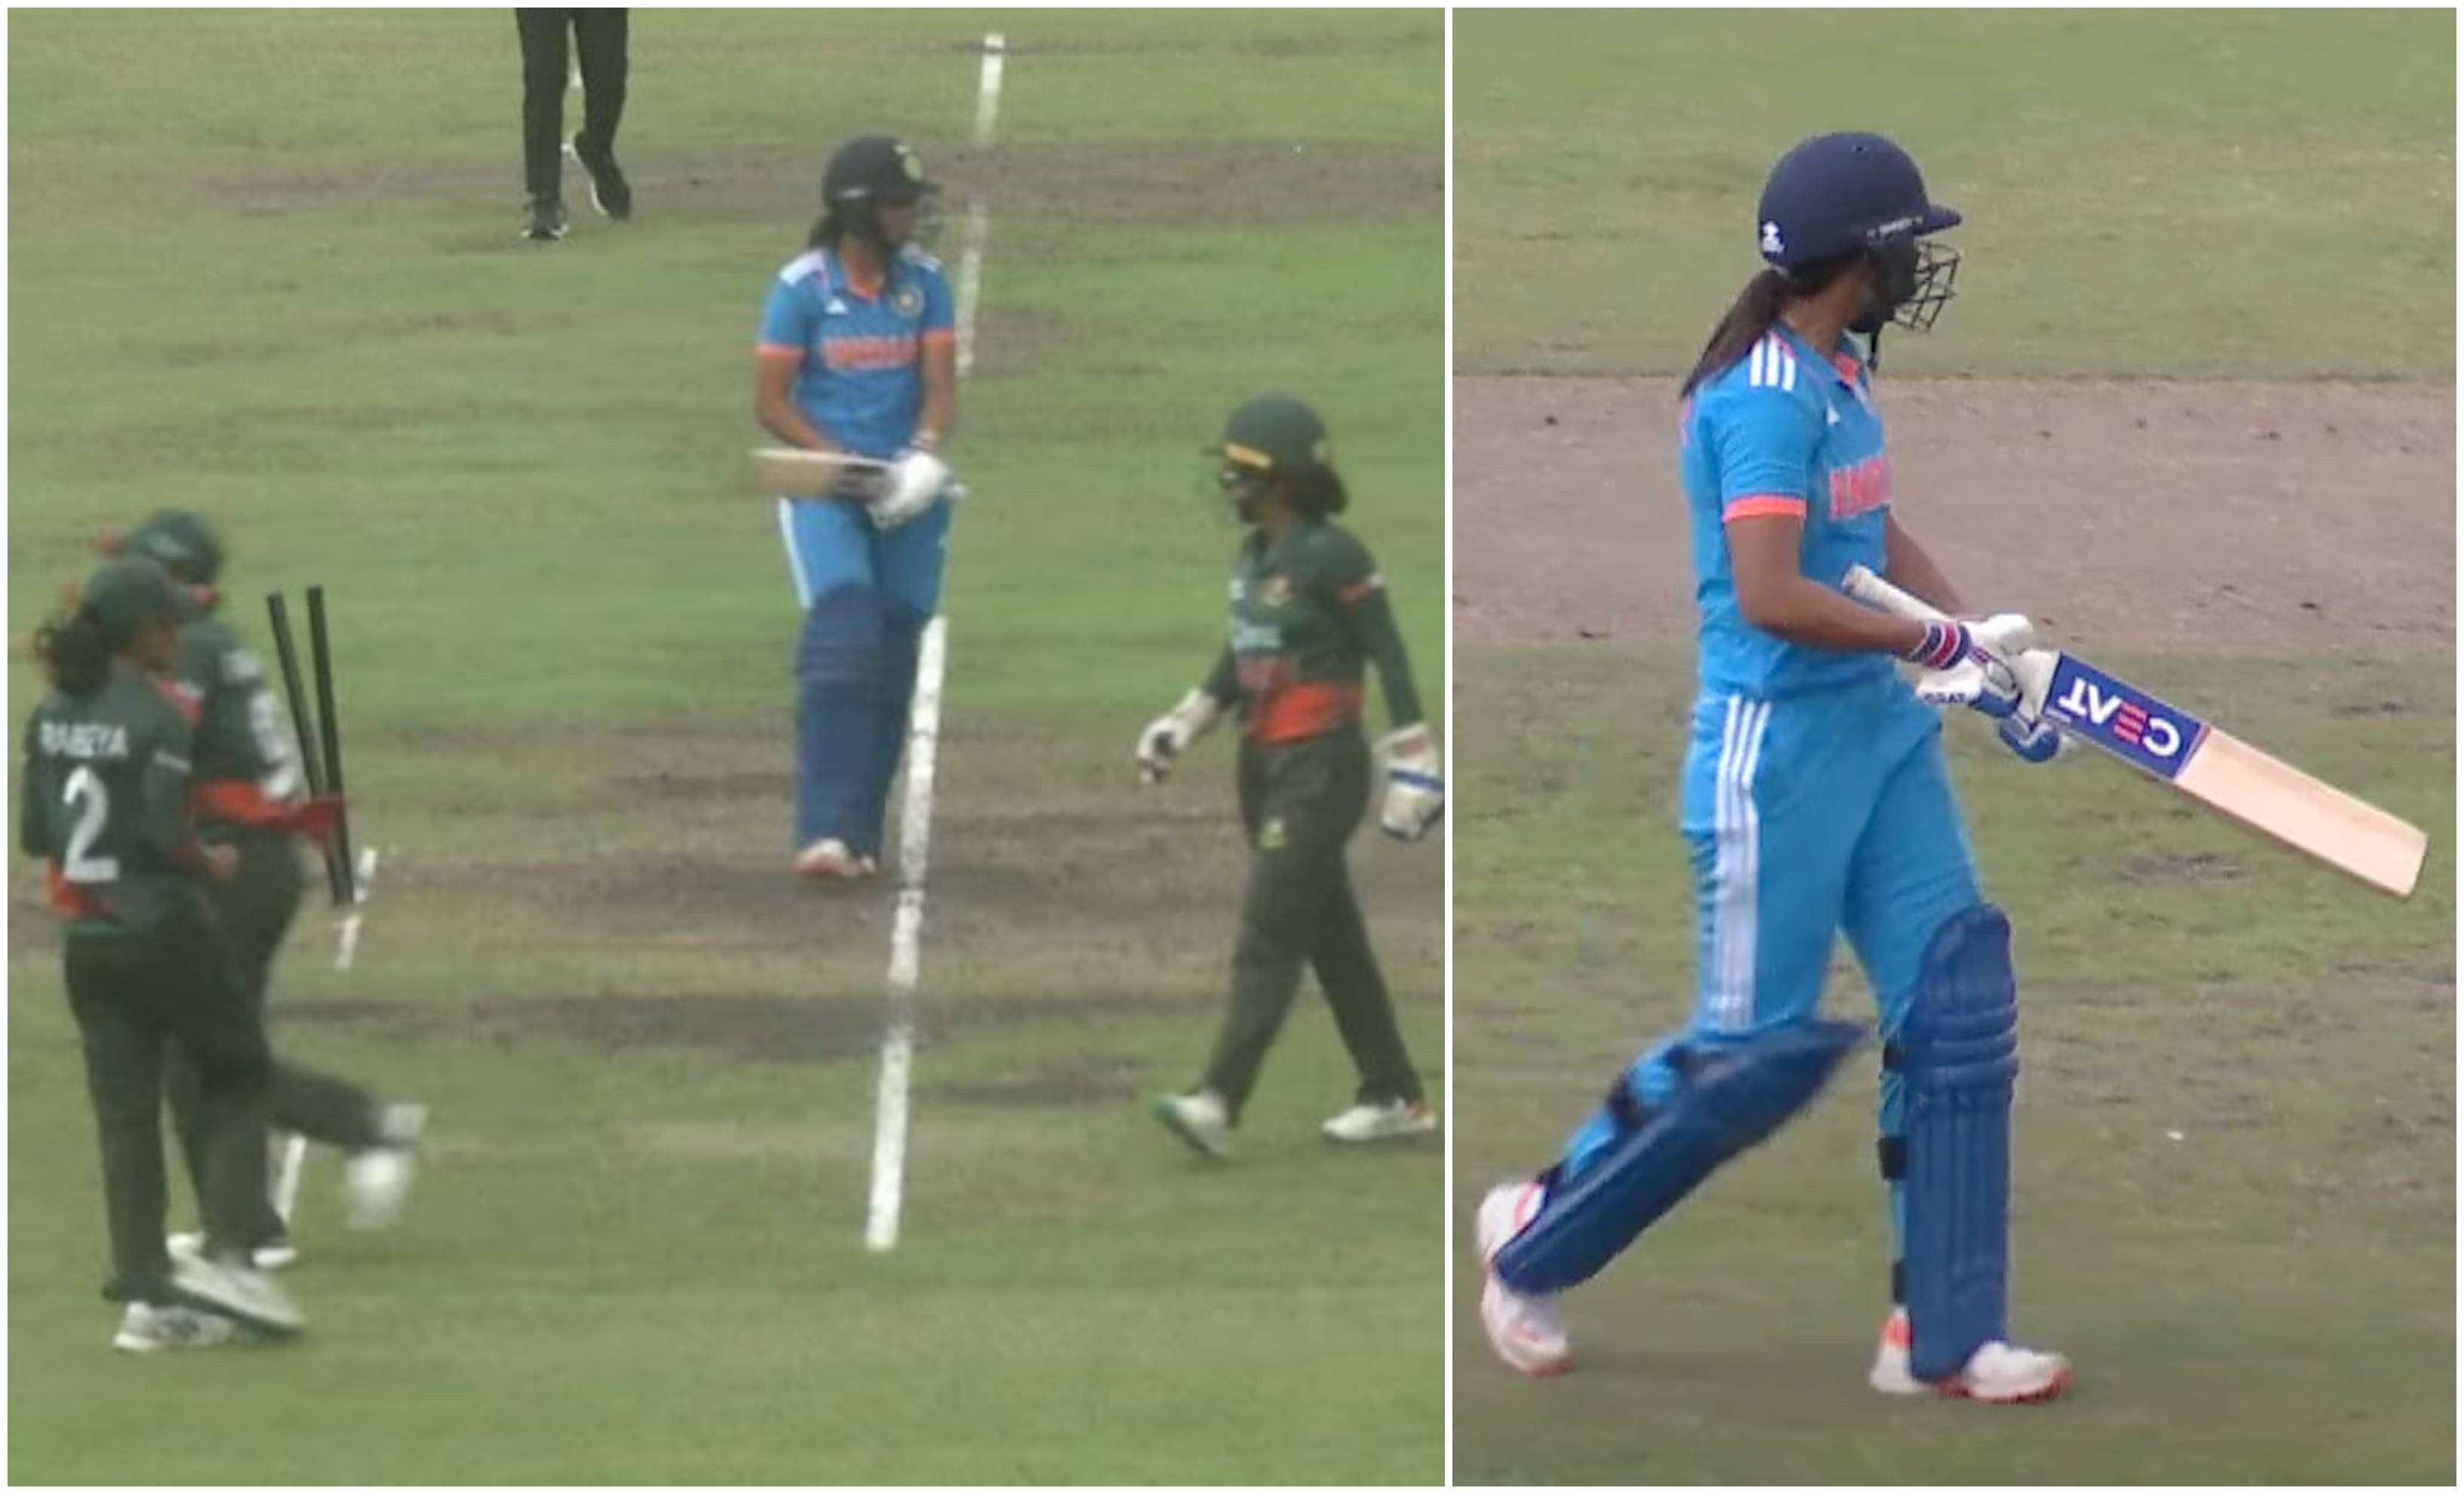 Harmanpreet Kaur lost her cool after being given out | Screengrab